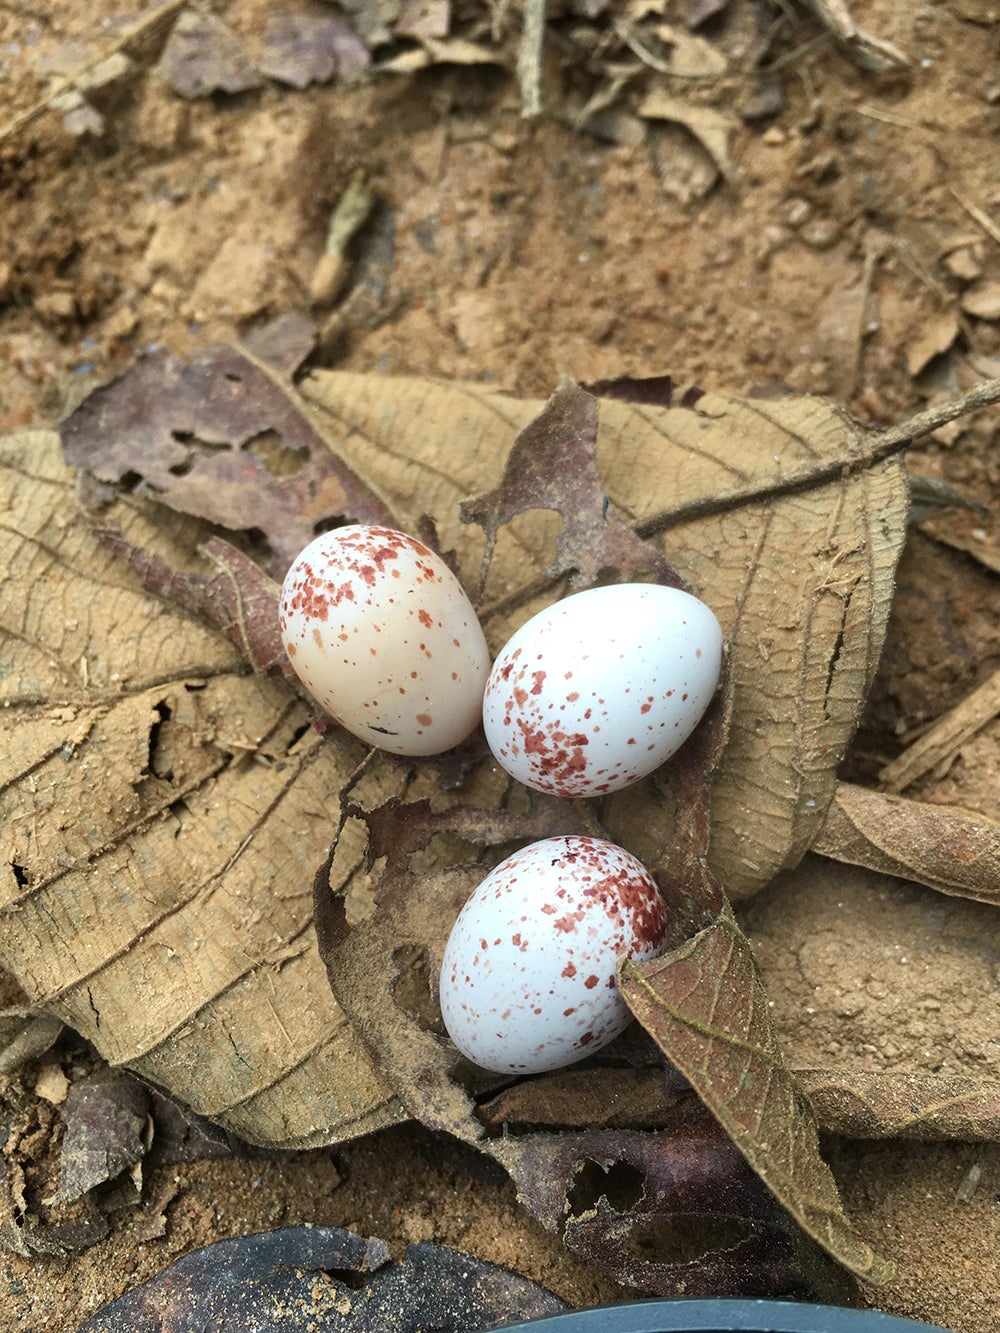 Three speckled eggs sitting on the ground on a dried brown leaf